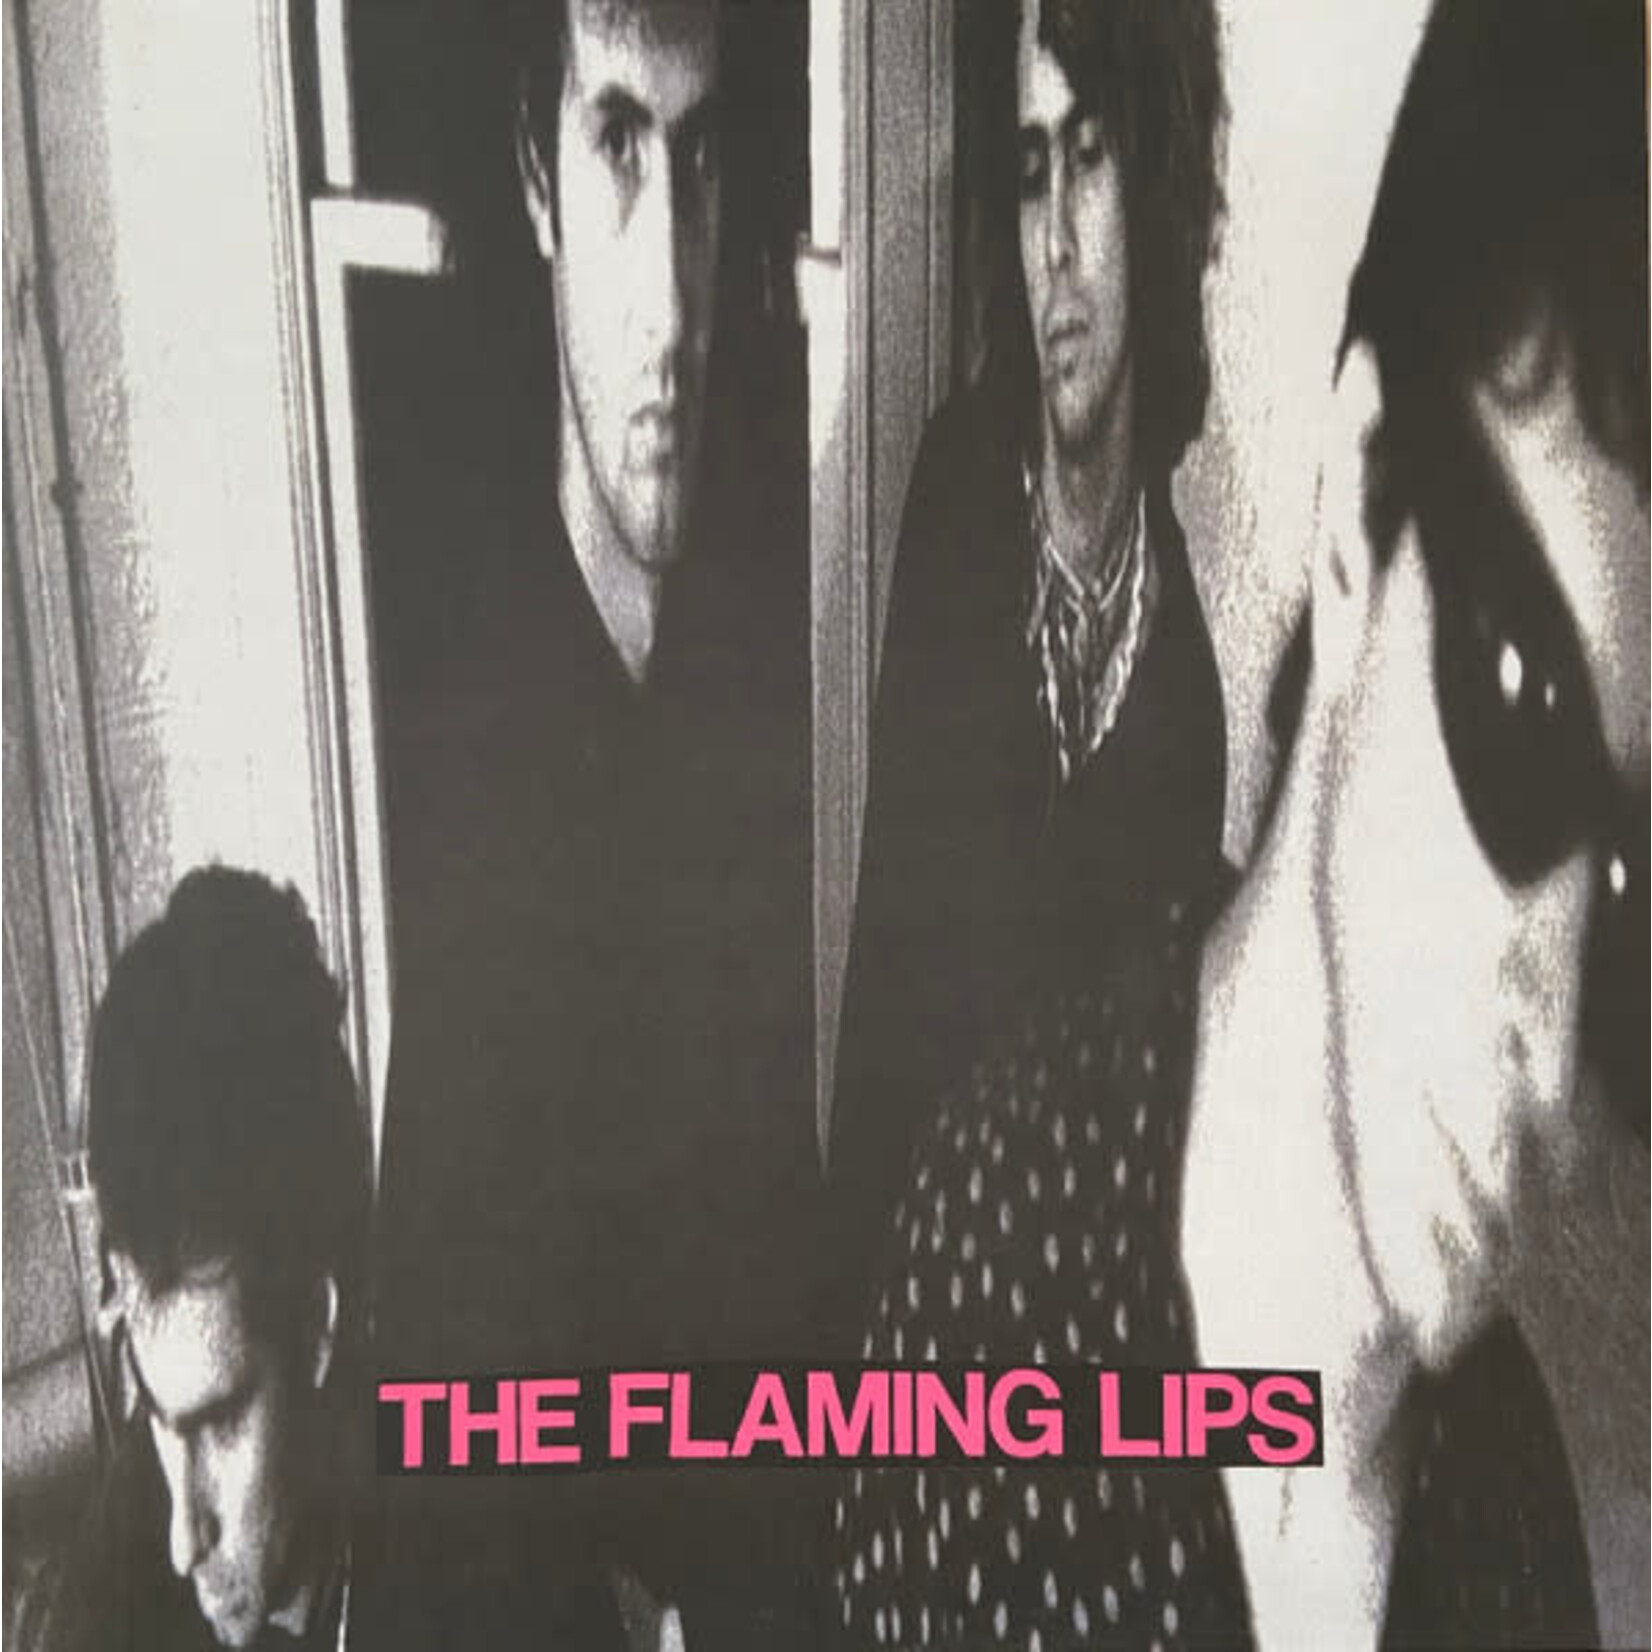 [Discontinued] Flaming Lips, The: In A Priest Driven Ambulance, With Silver Sunshine Stares [WARNER]